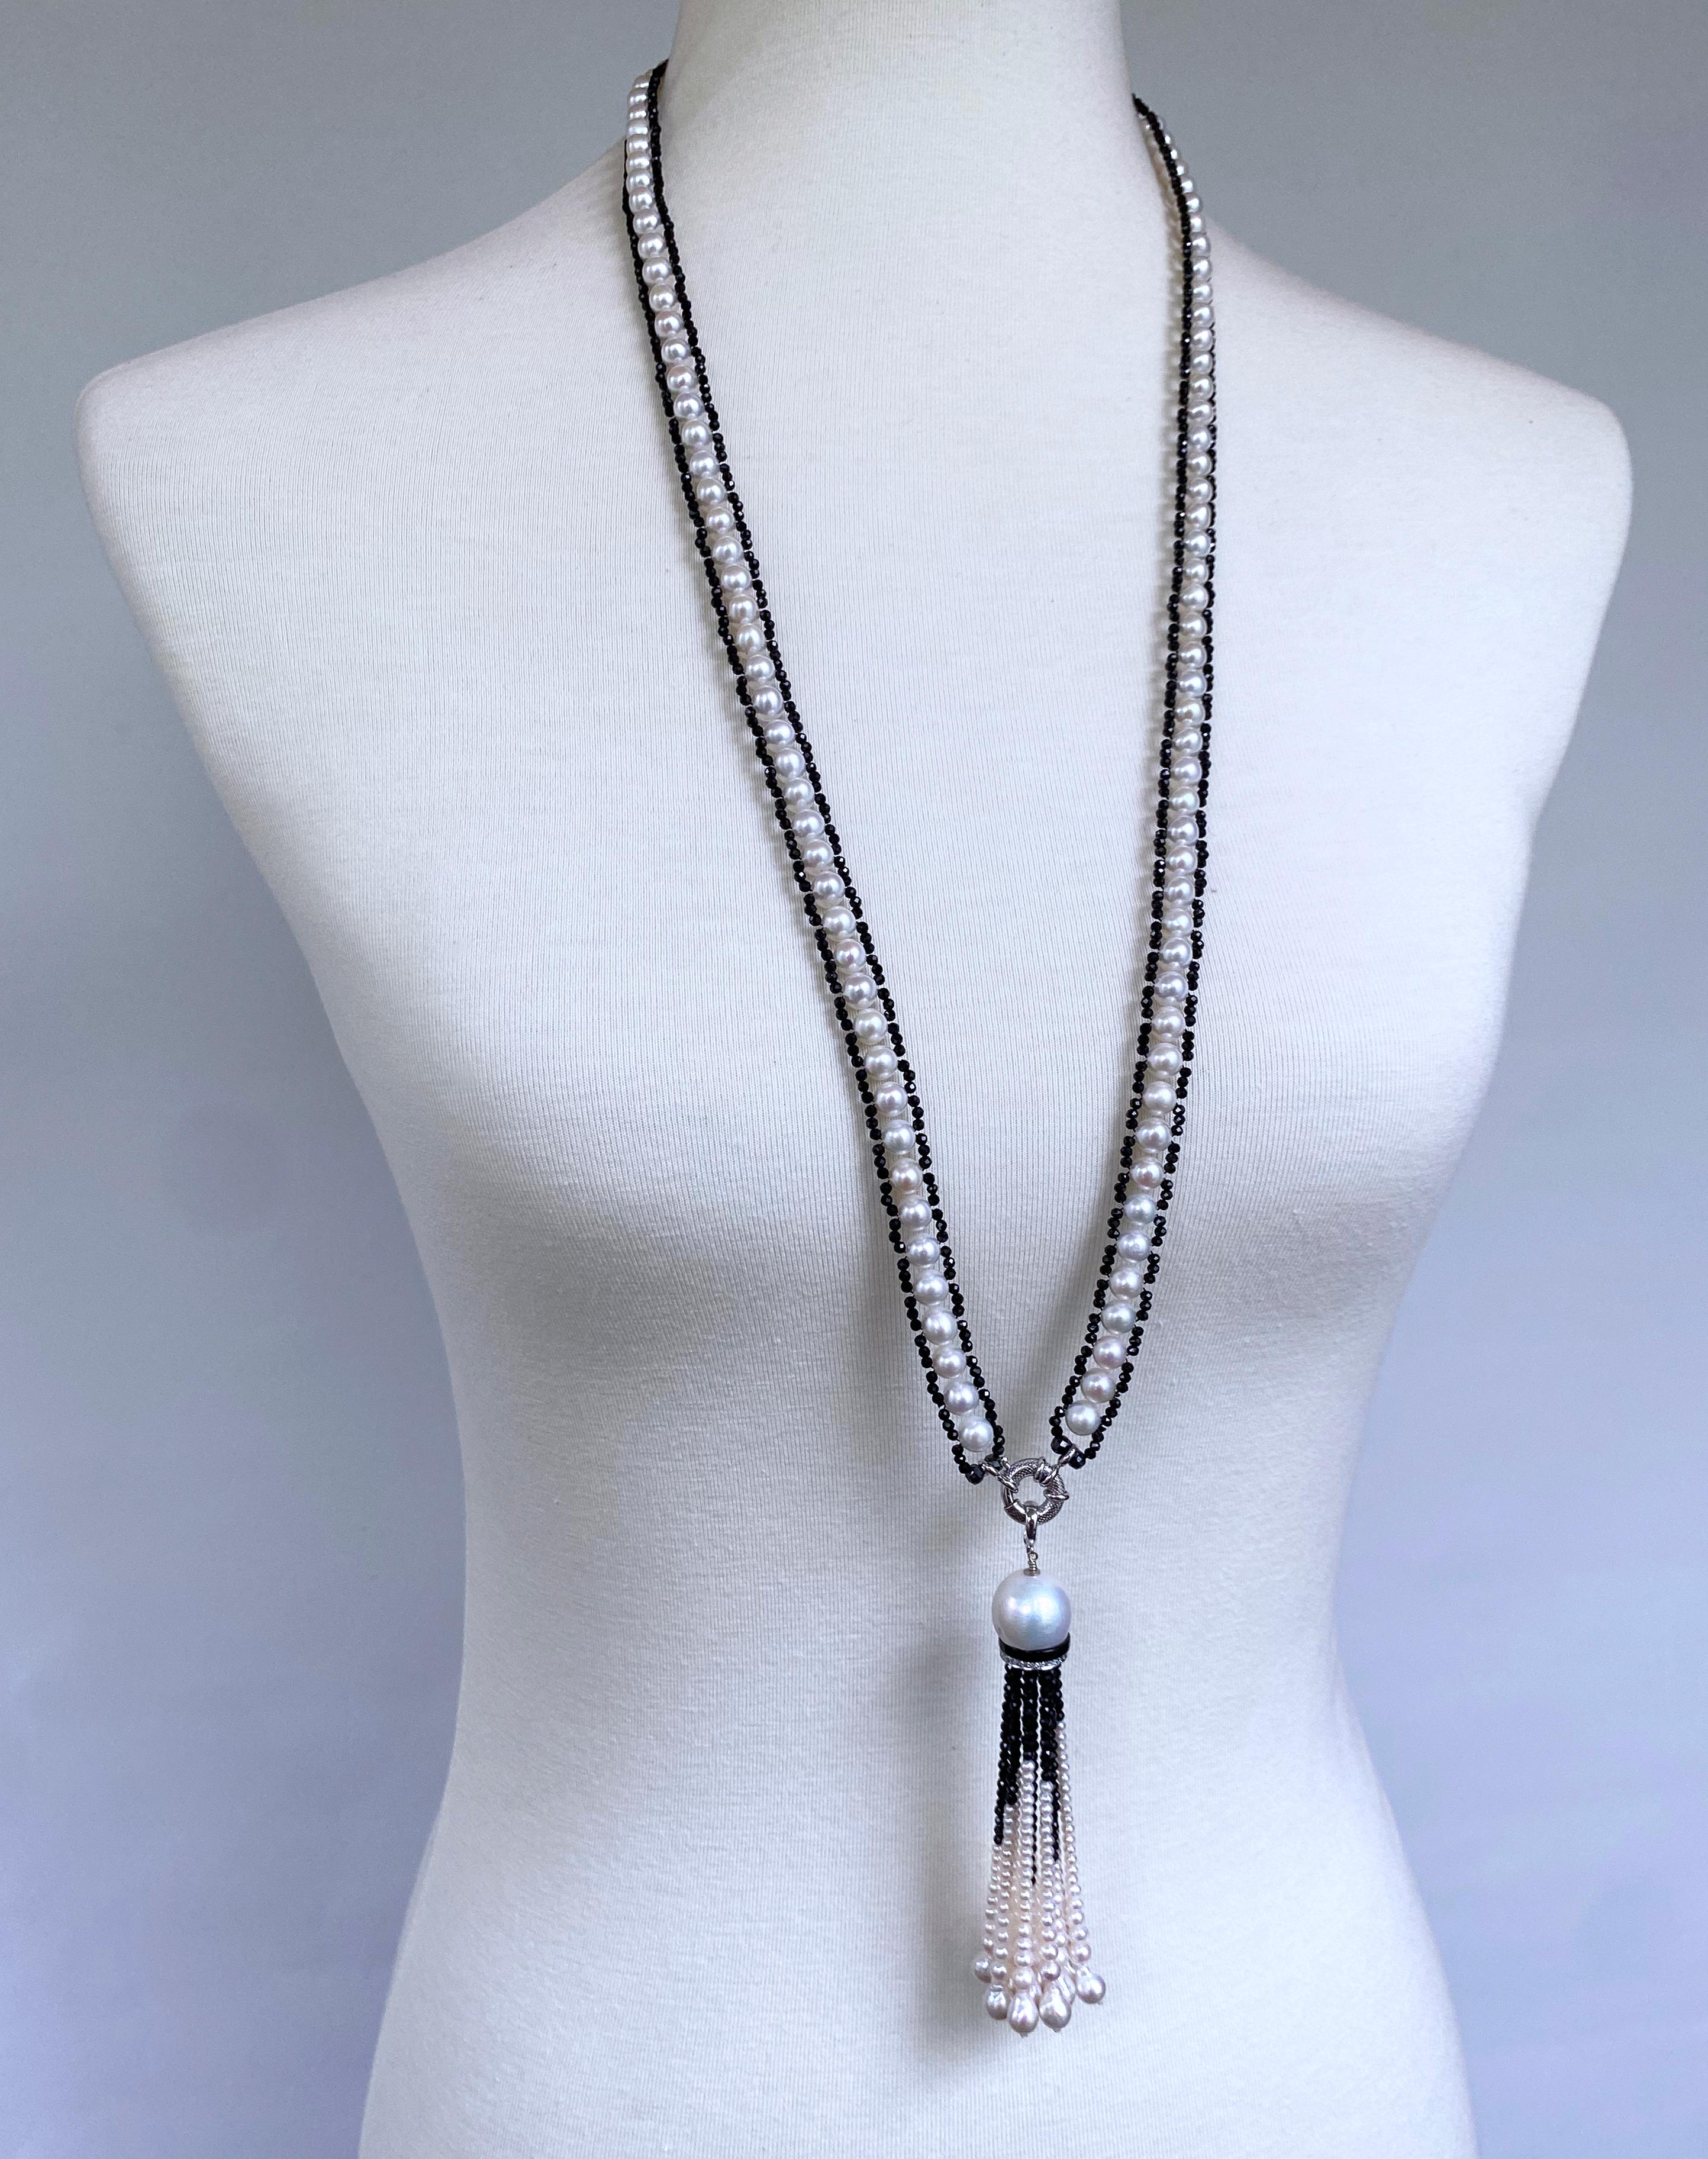 Gorgeous piece by Marina J. This Sautoir features beautiful White Cultured Pearls all intricately woven with and adorned by Faceted Black Spinel. The Spinel display a thunderous shine, glistening with every step. Measuring 35 inches long, this